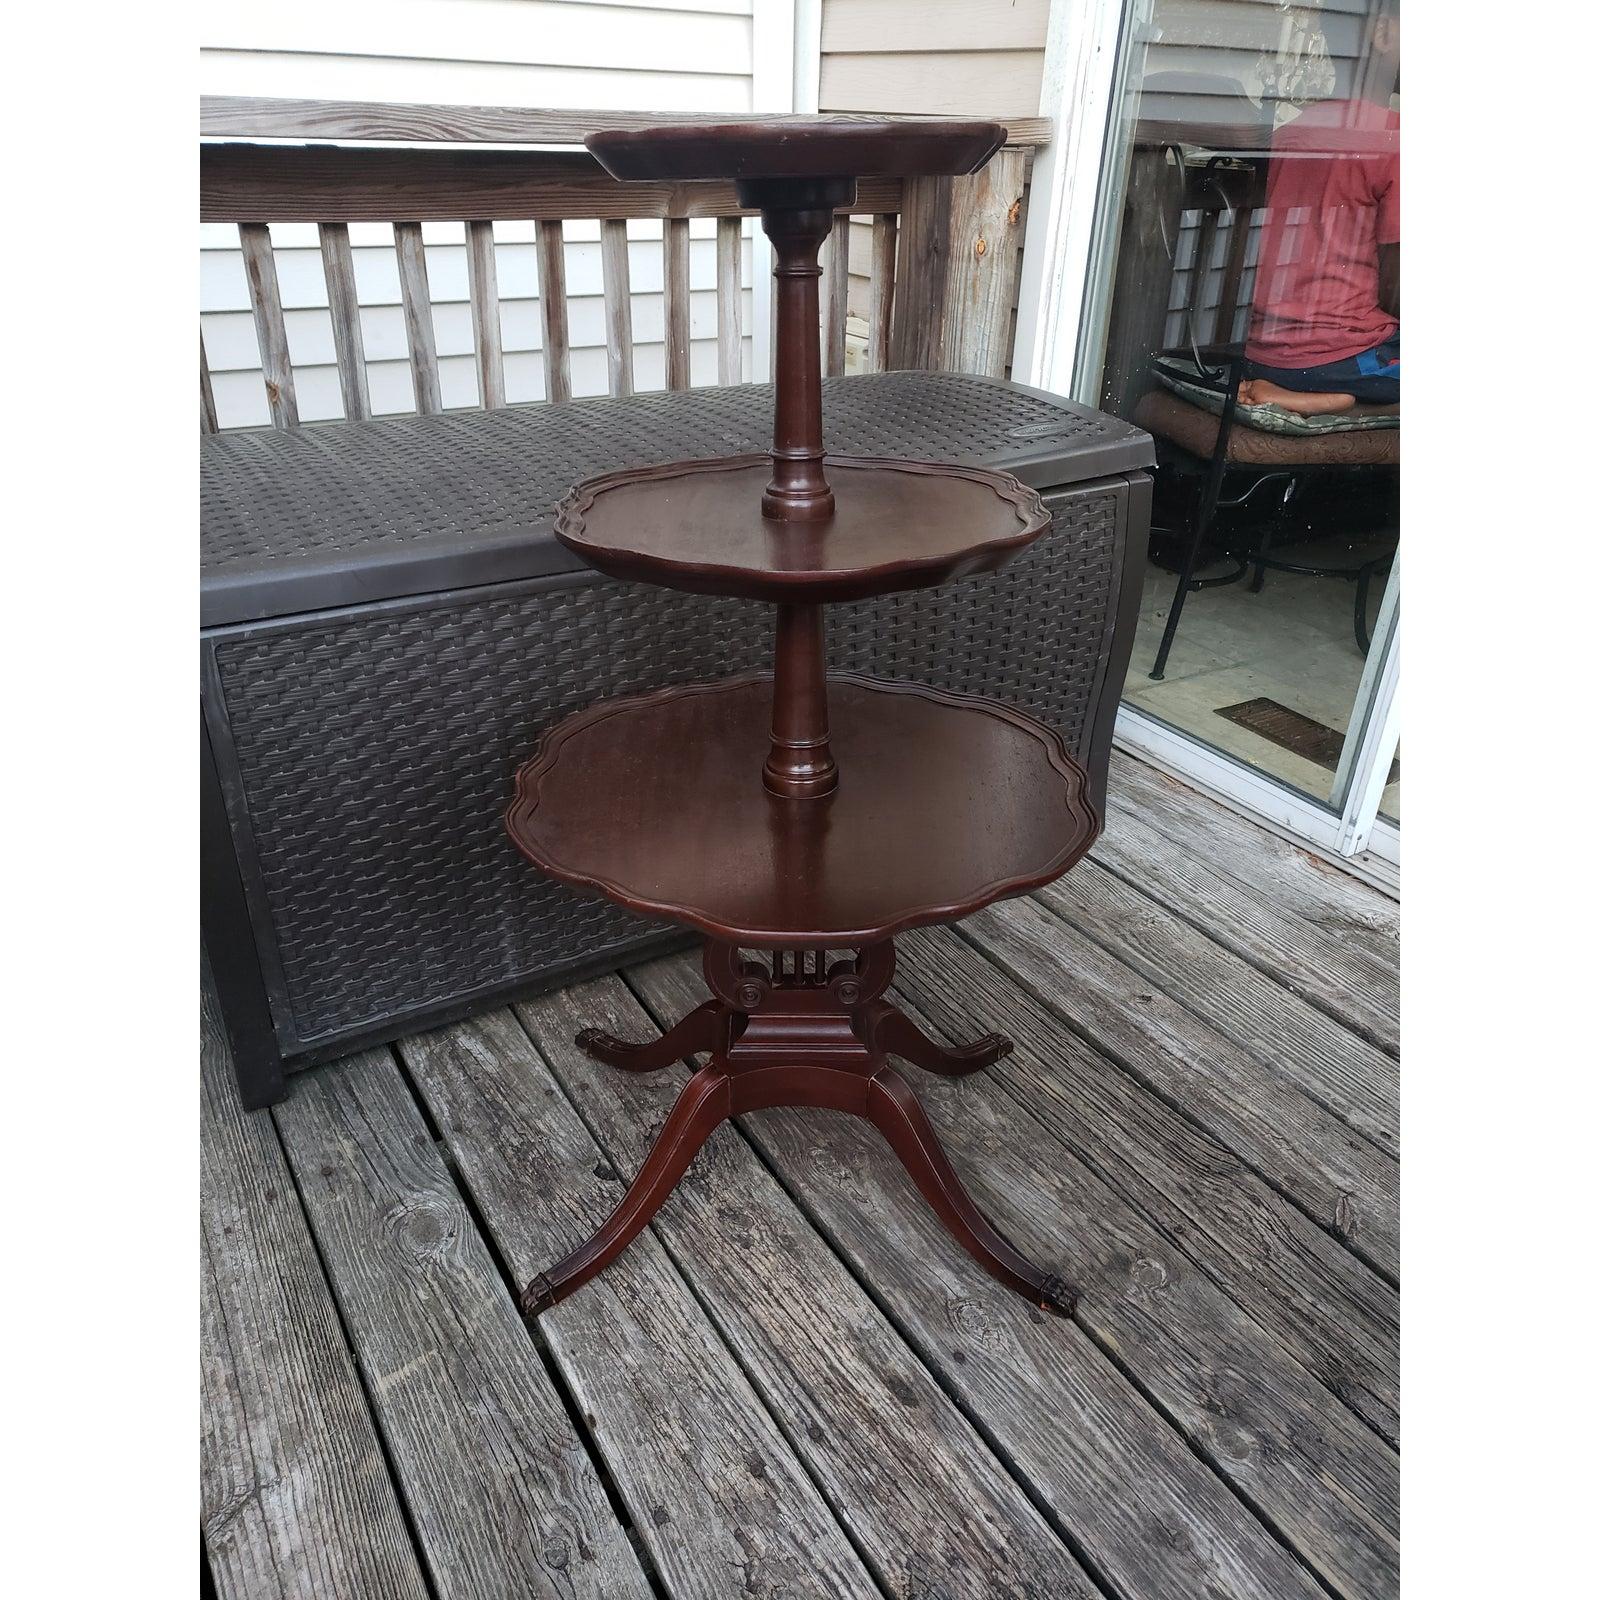 British Colonial Antique Mersman Mahogany Lyre Base 3 Tier Dumbwaiter Table For Sale